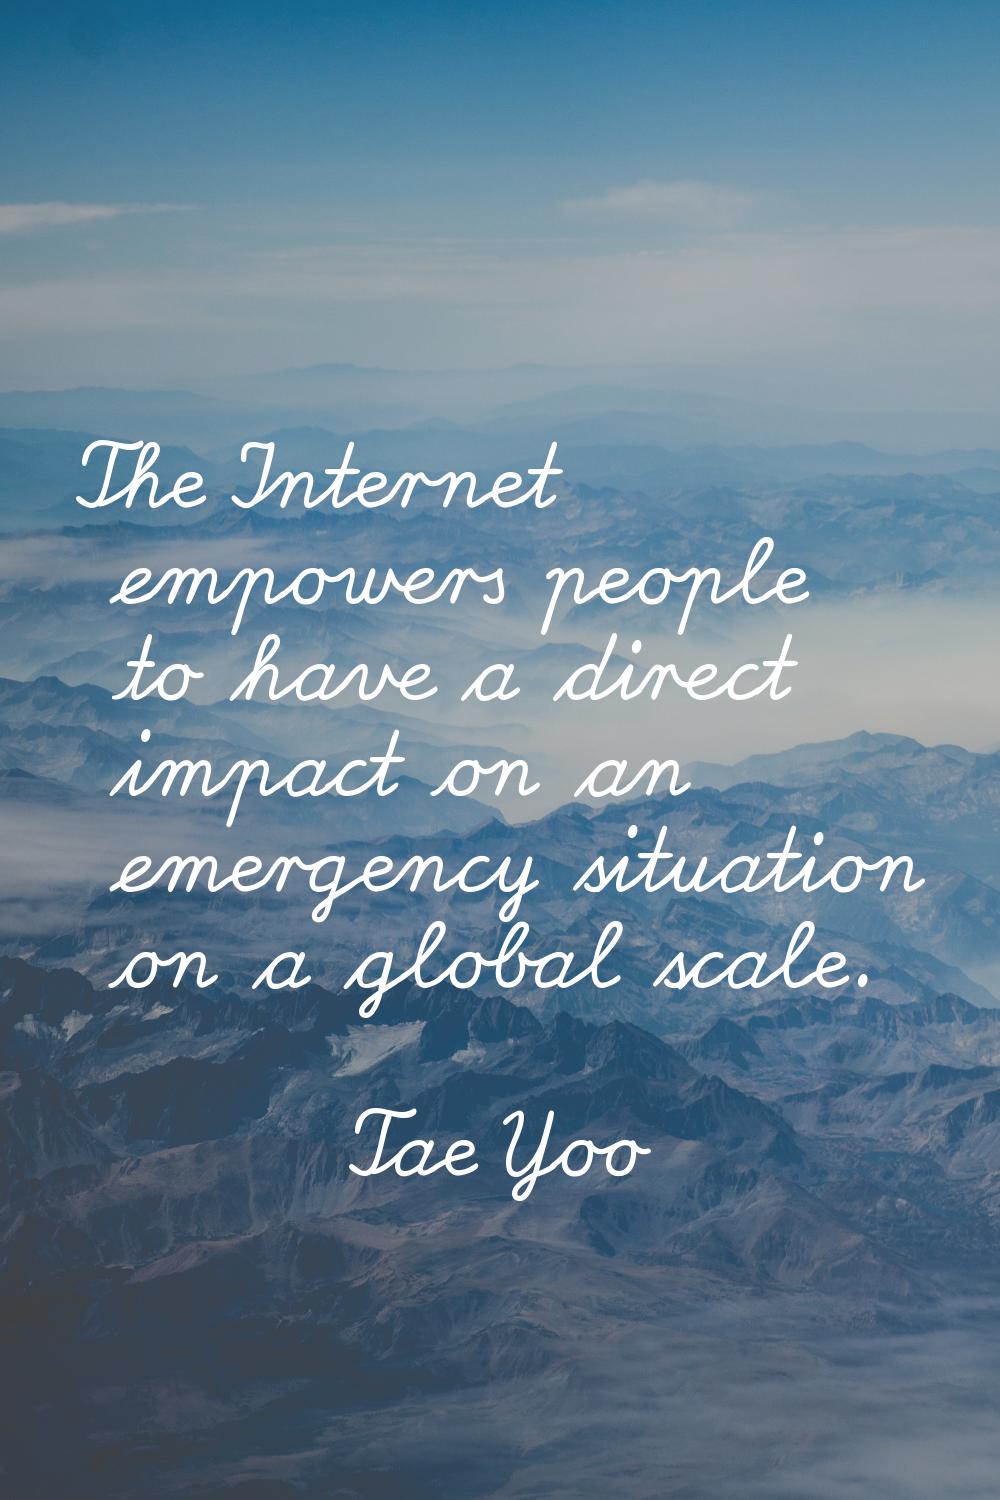 The Internet empowers people to have a direct impact on an emergency situation on a global scale.